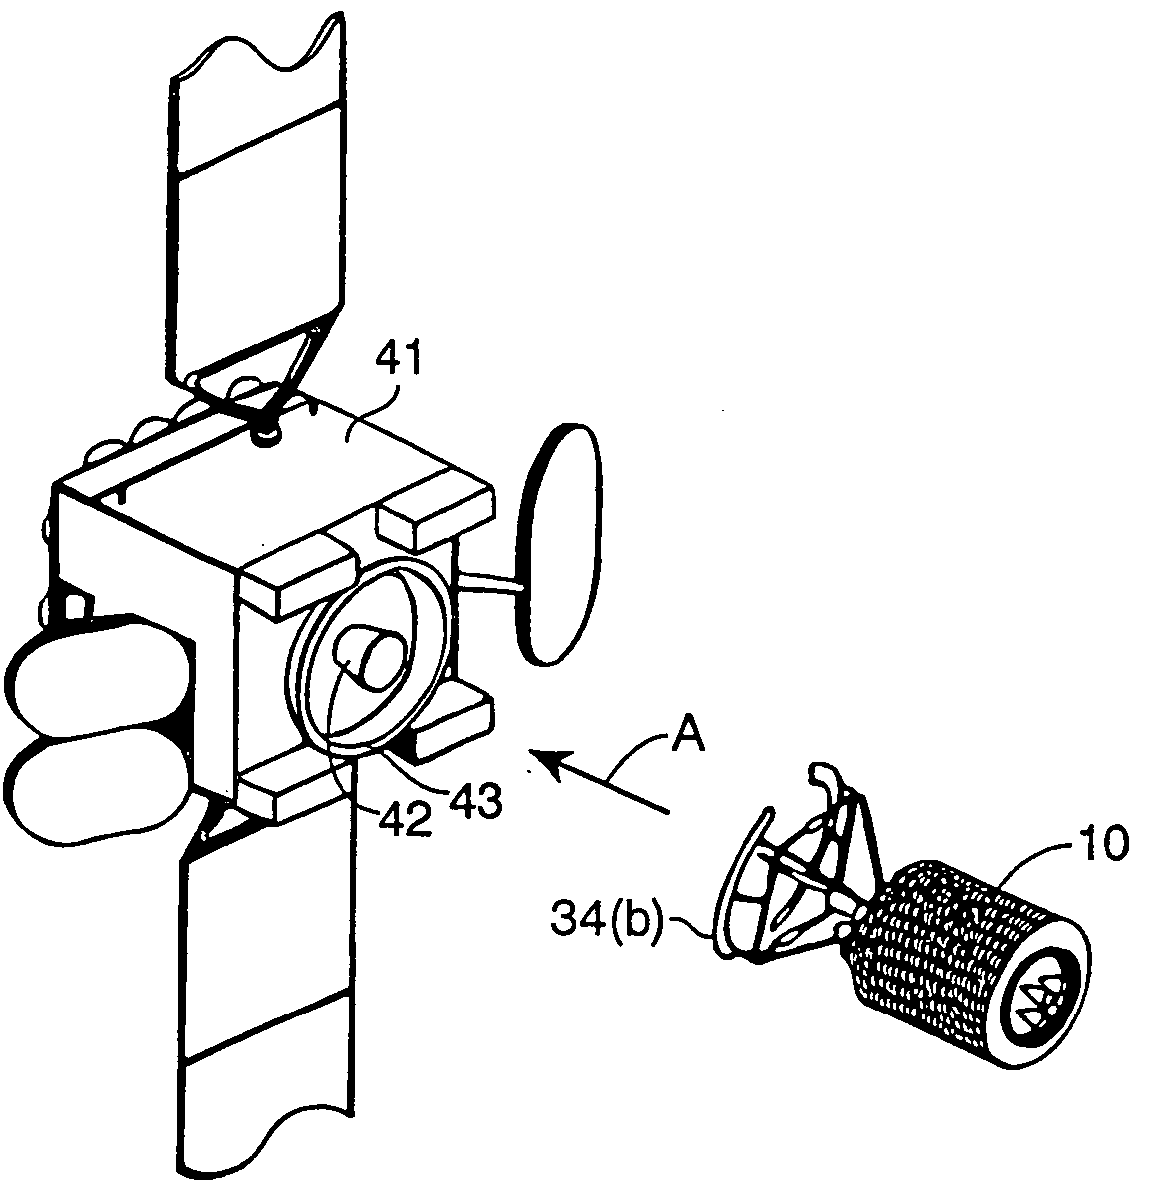 Apparatus and methods for in-space satellite operations